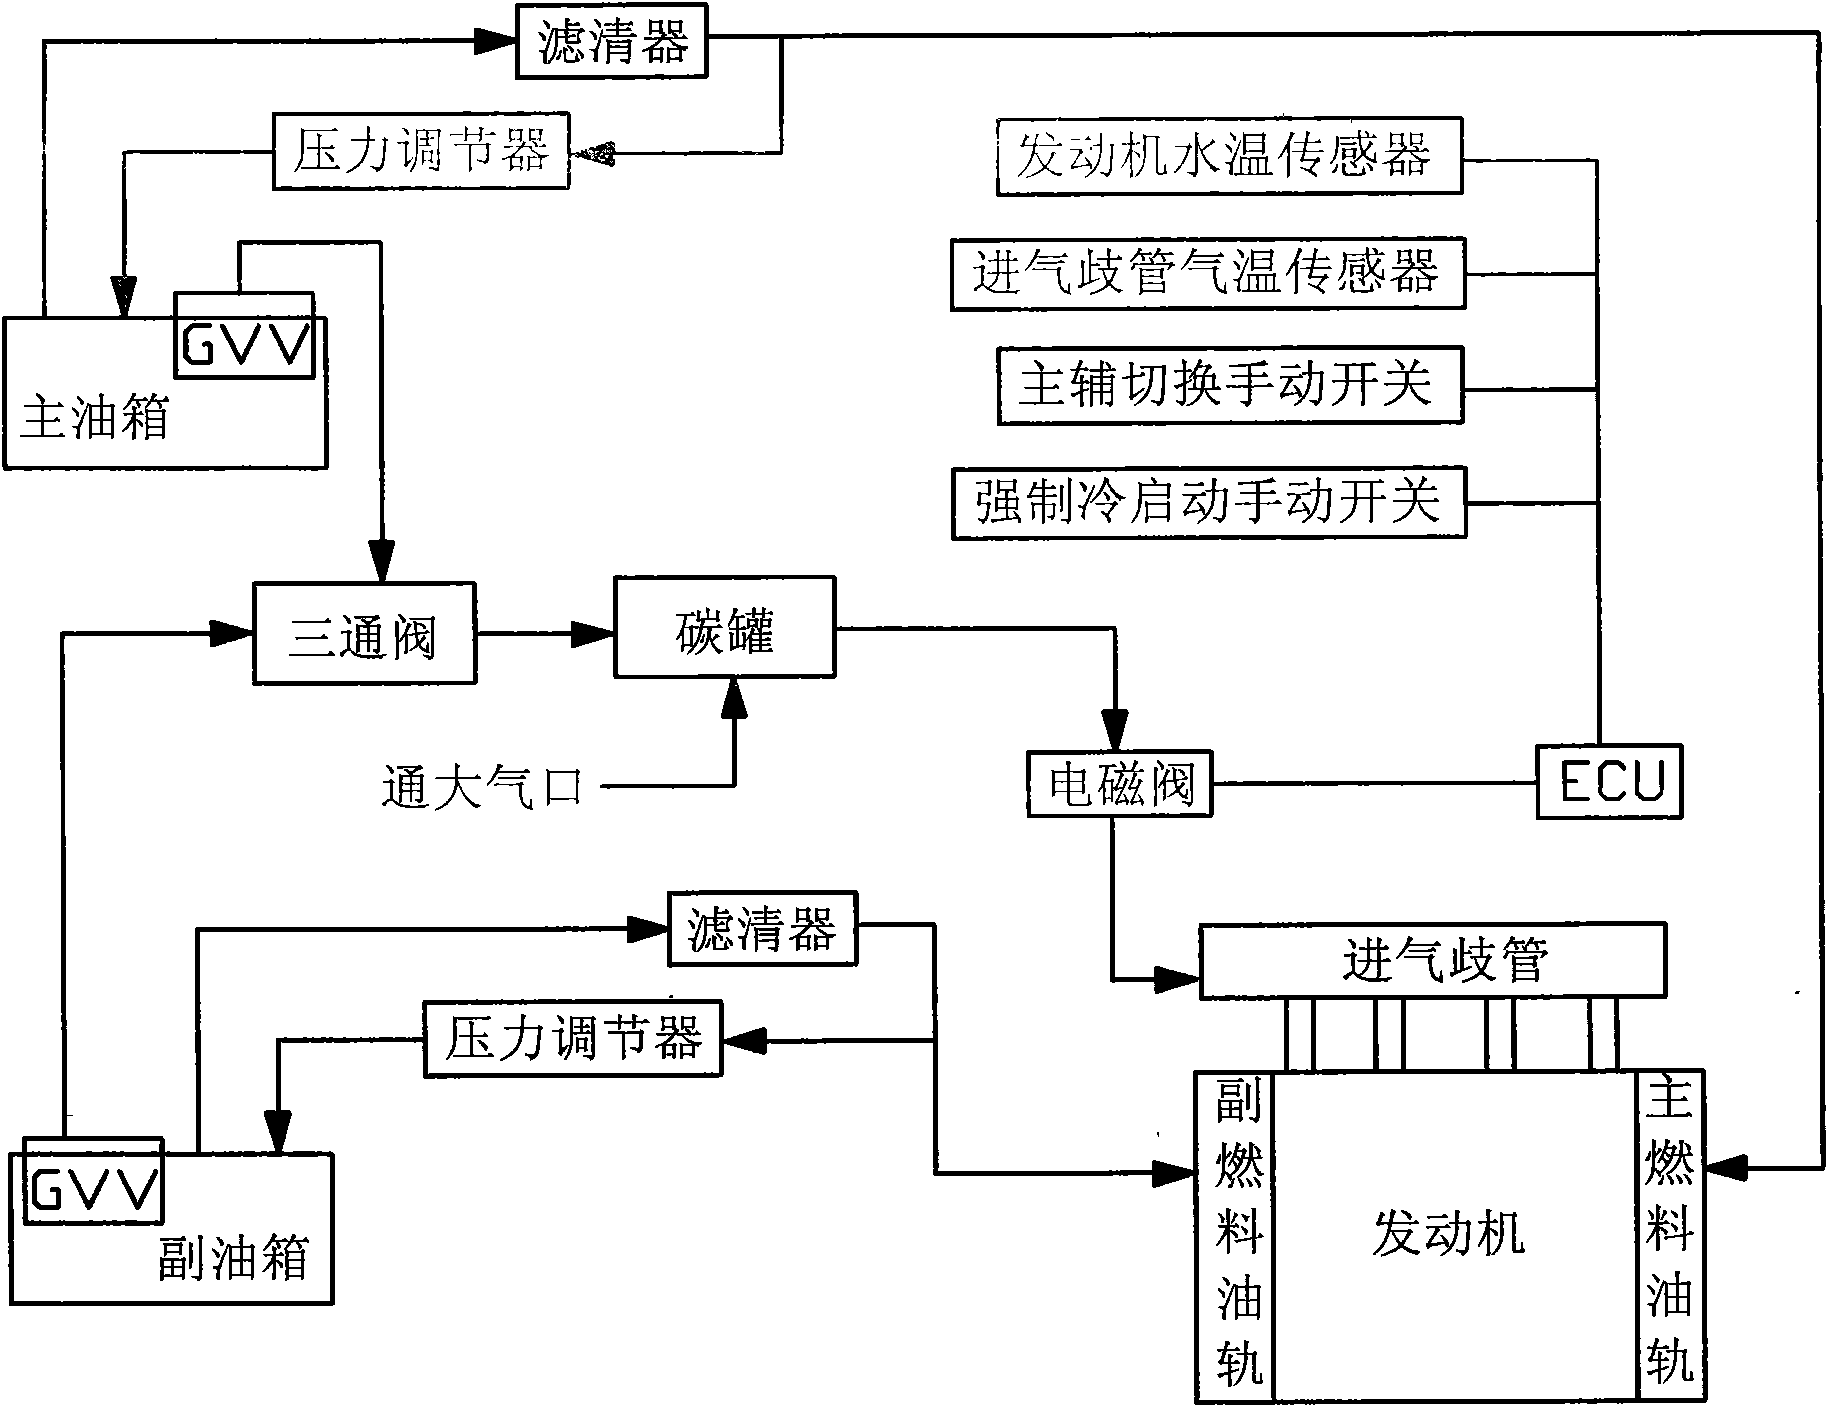 Fuel supply system of double-fuel automobile